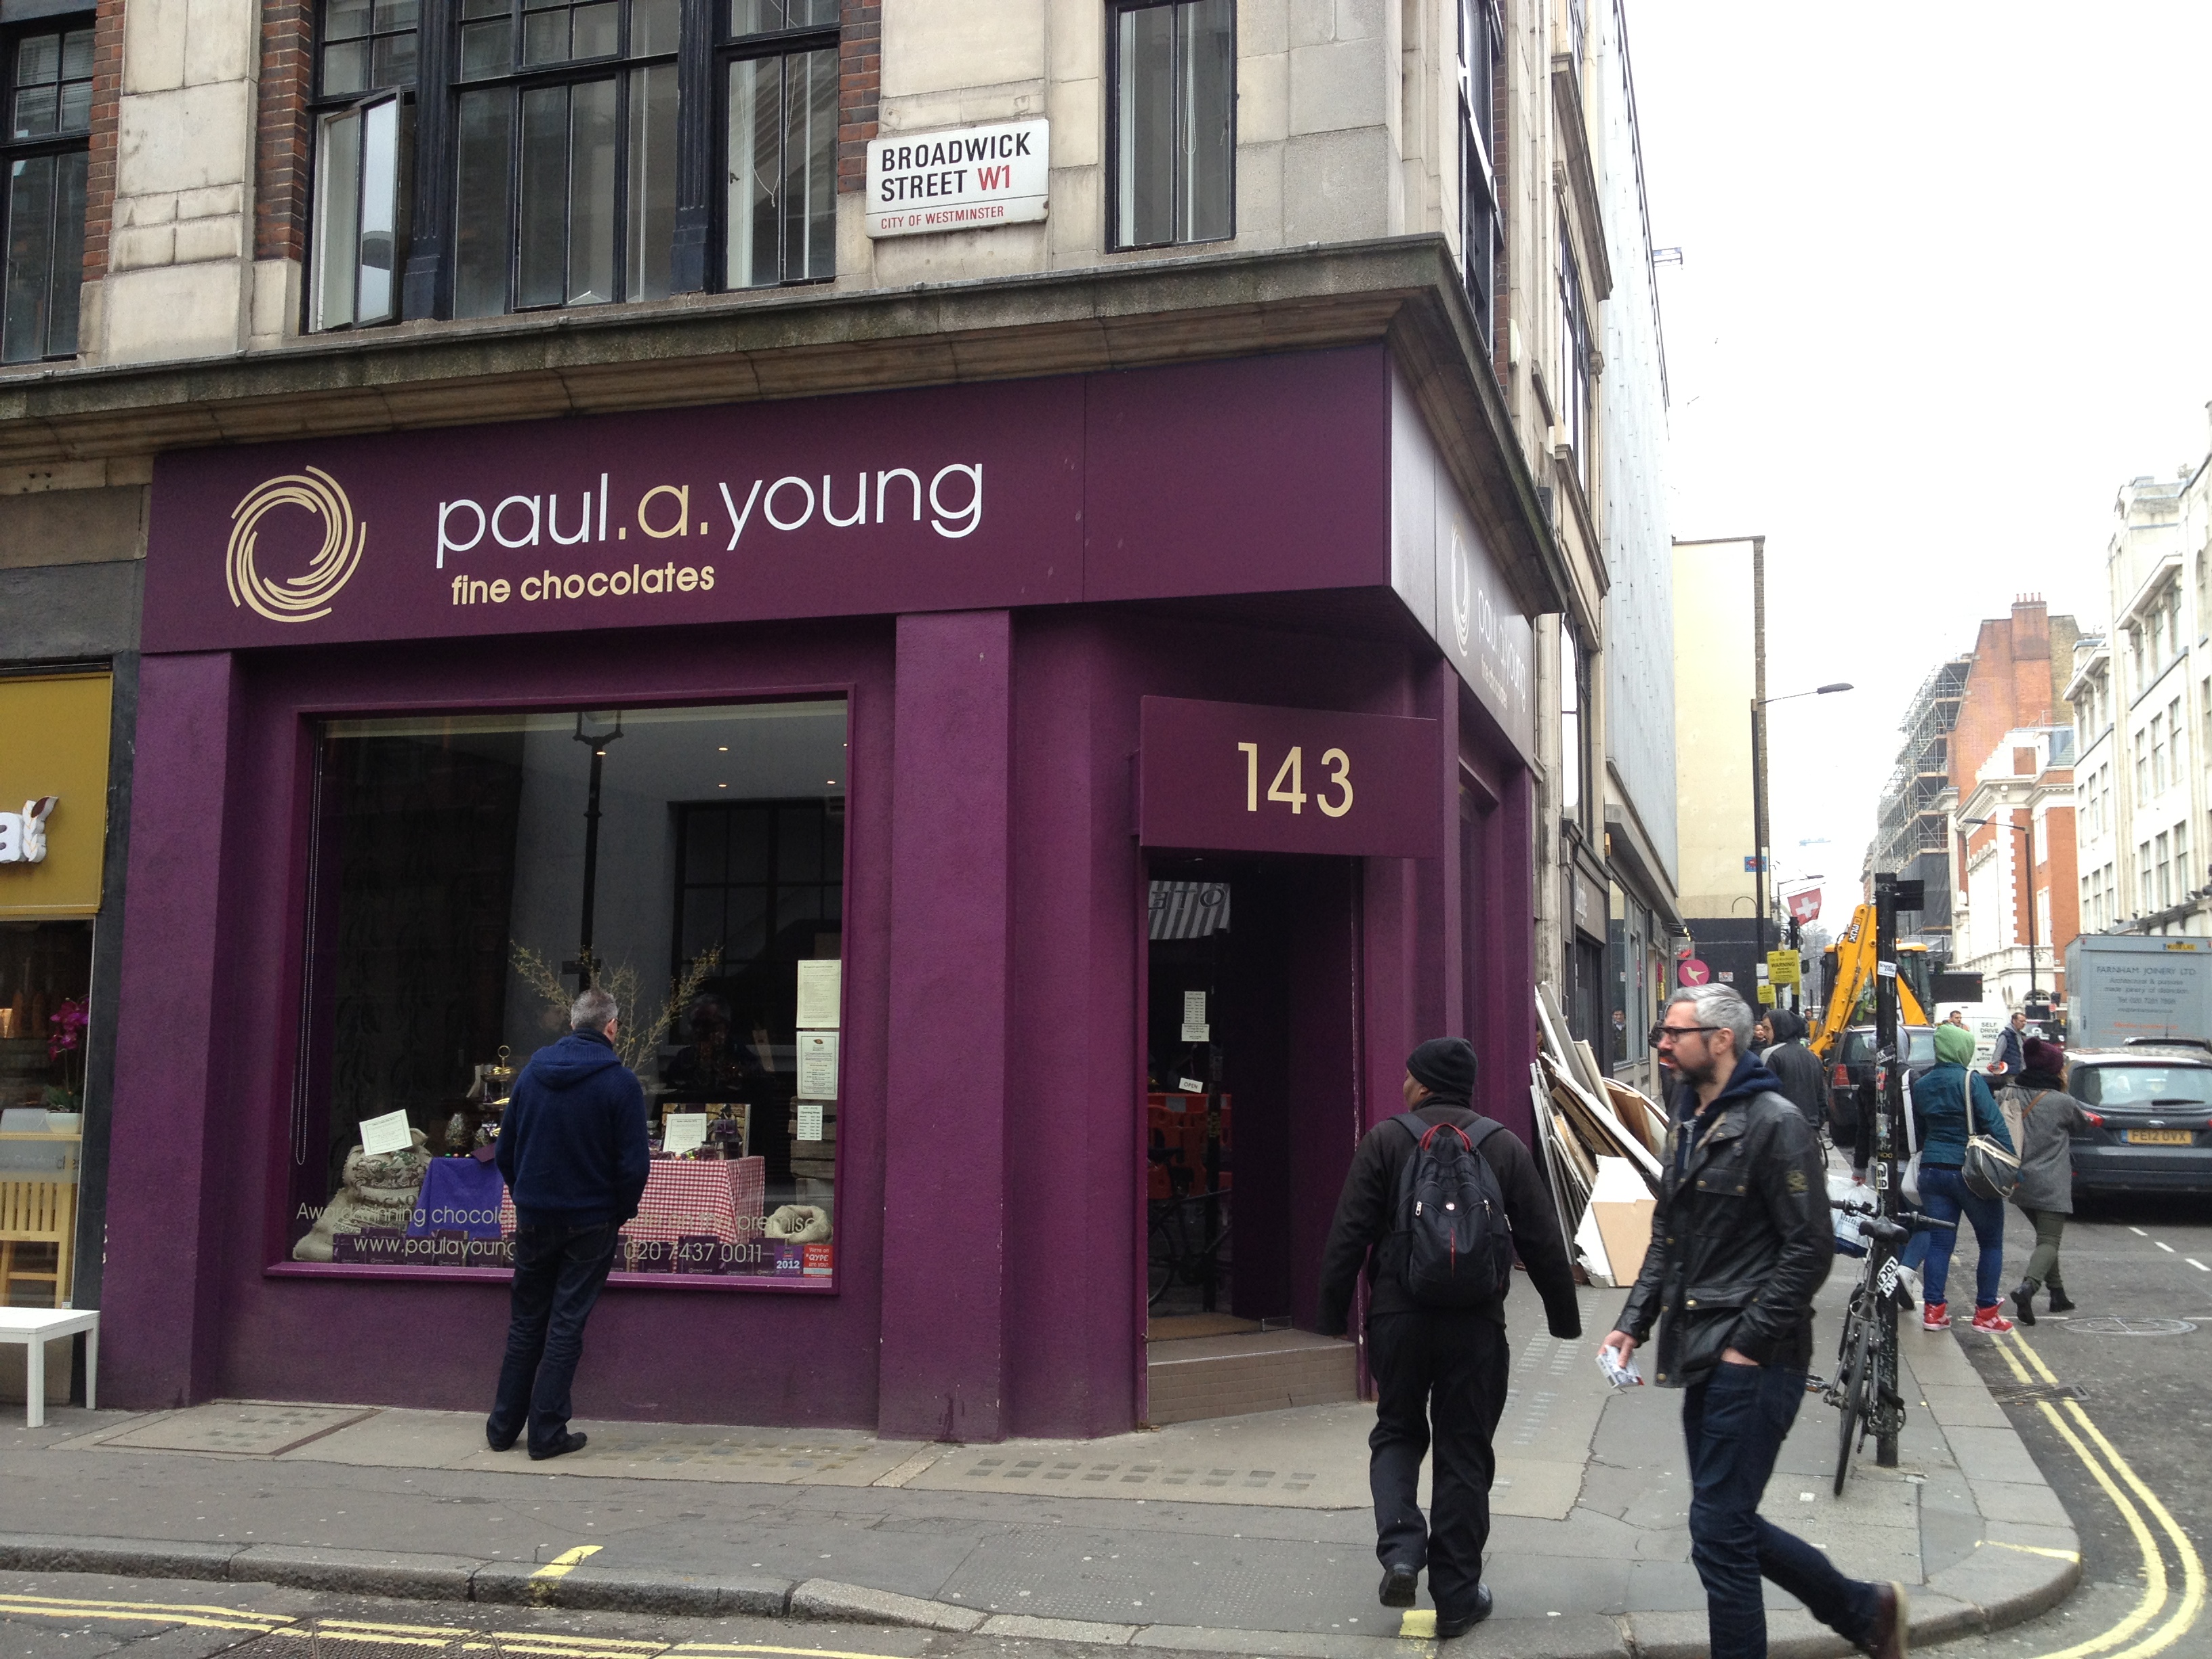 Paul A. Young flagship store in Soho London